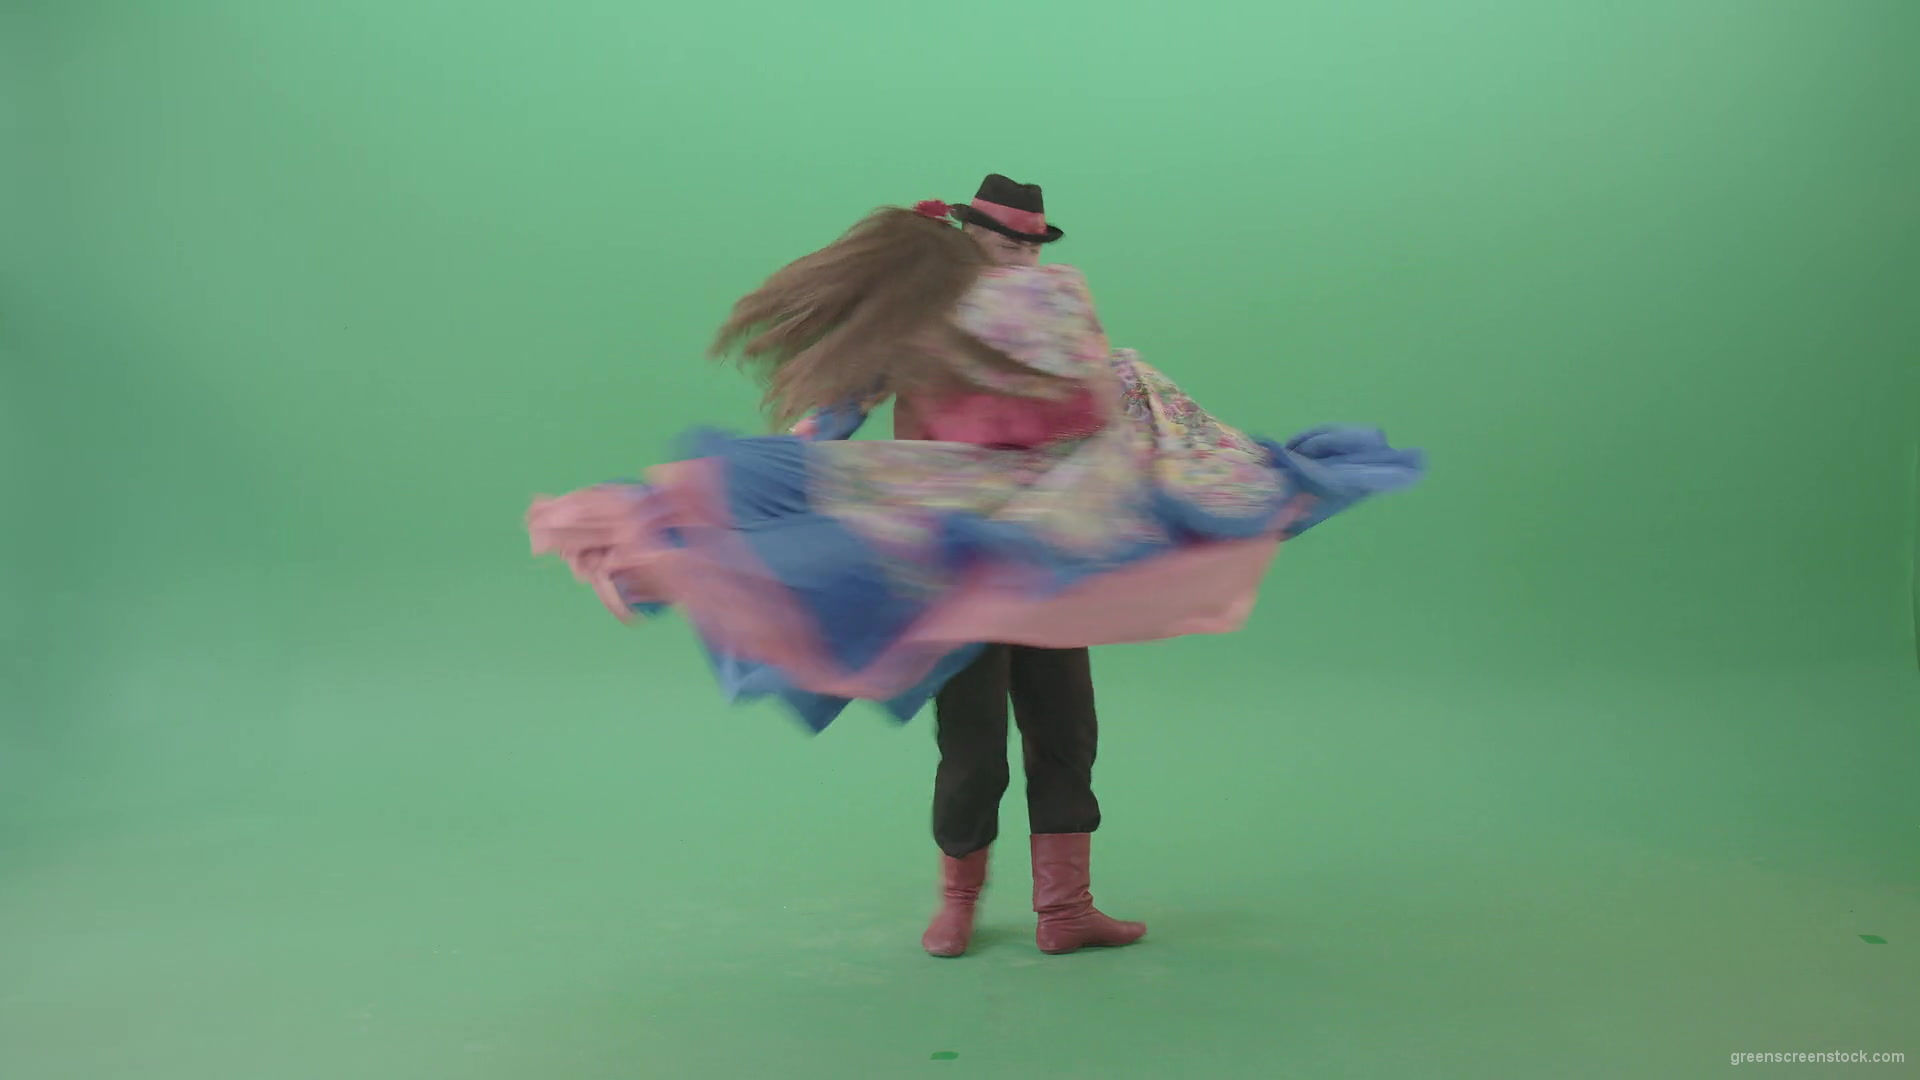 Gypsy-man-and-woman-spinning-dancing-over-green-screen-4K-video-footage-1920_004 Green Screen Stock